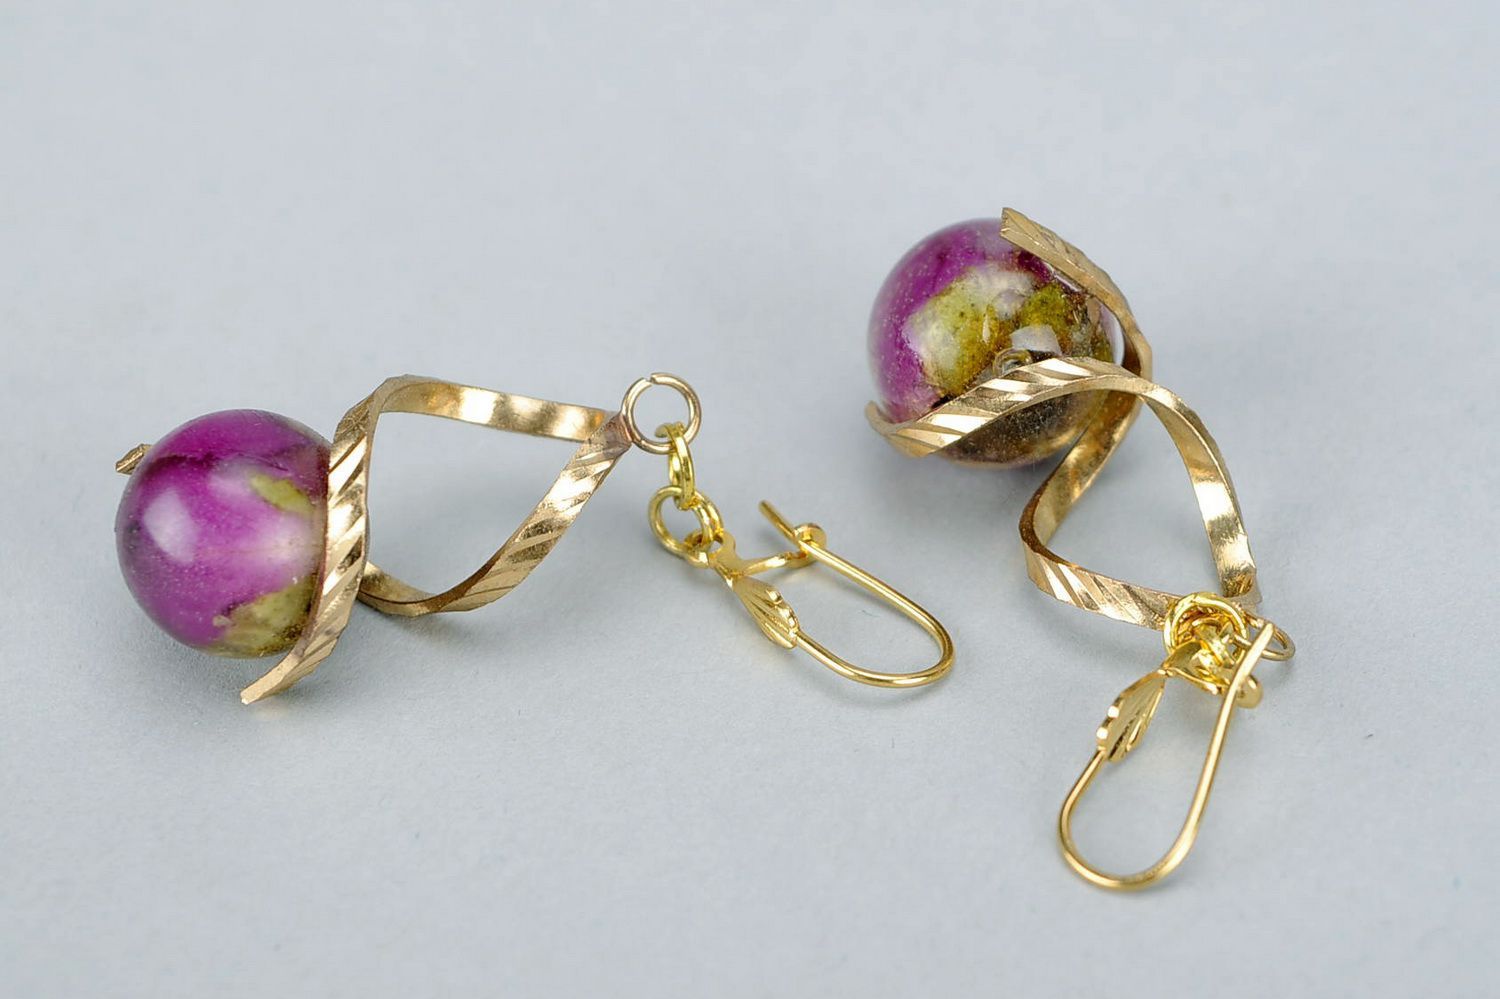 Golden earrings made from rose buds photo 3